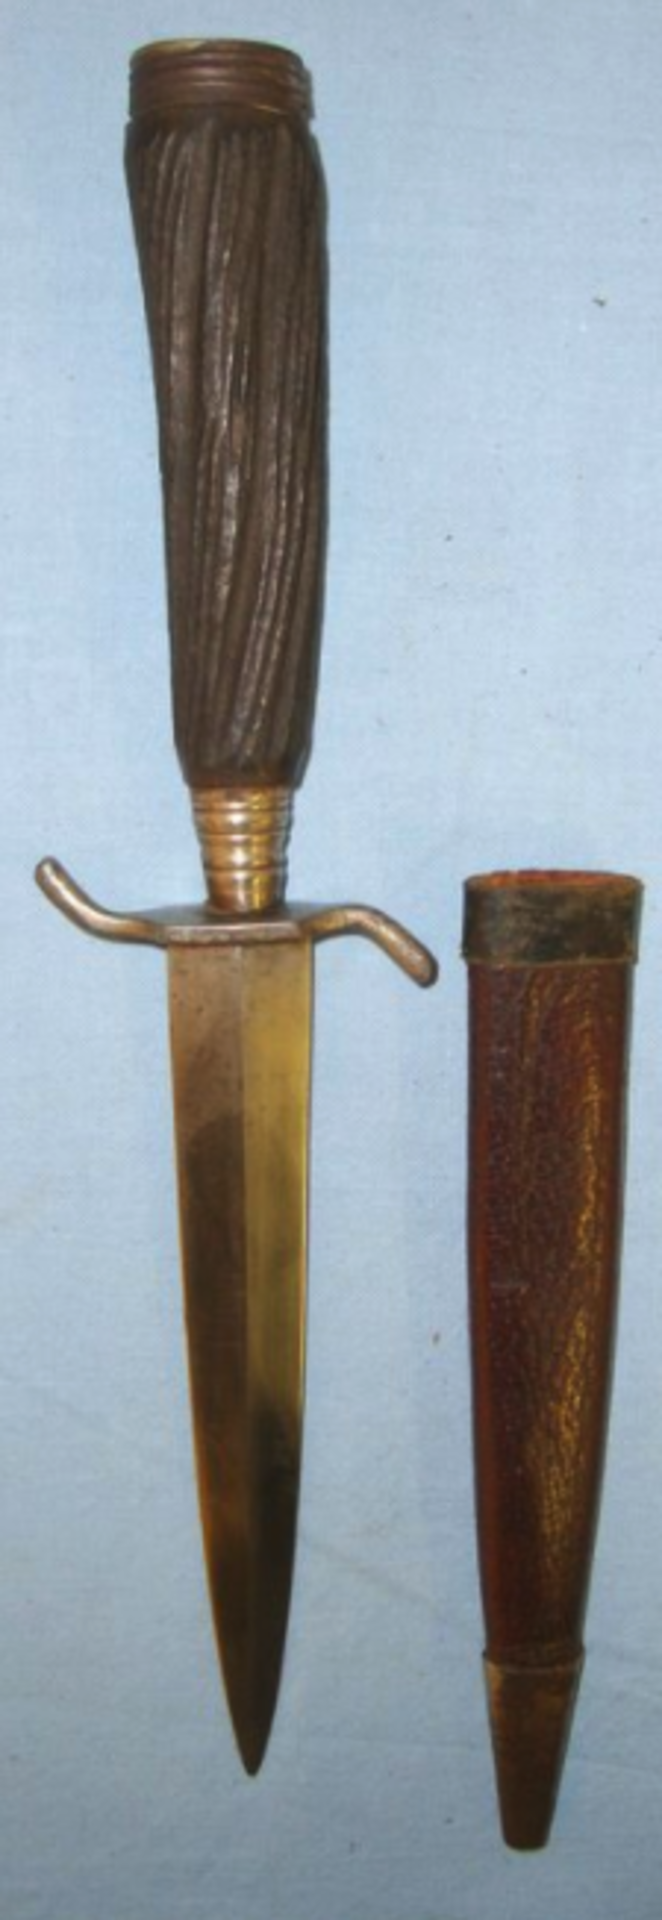 WW1 German Trench/Fighting Knife With Carved Wood Simulated Stag-Horn Hilt & Scabbard - Image 2 of 3